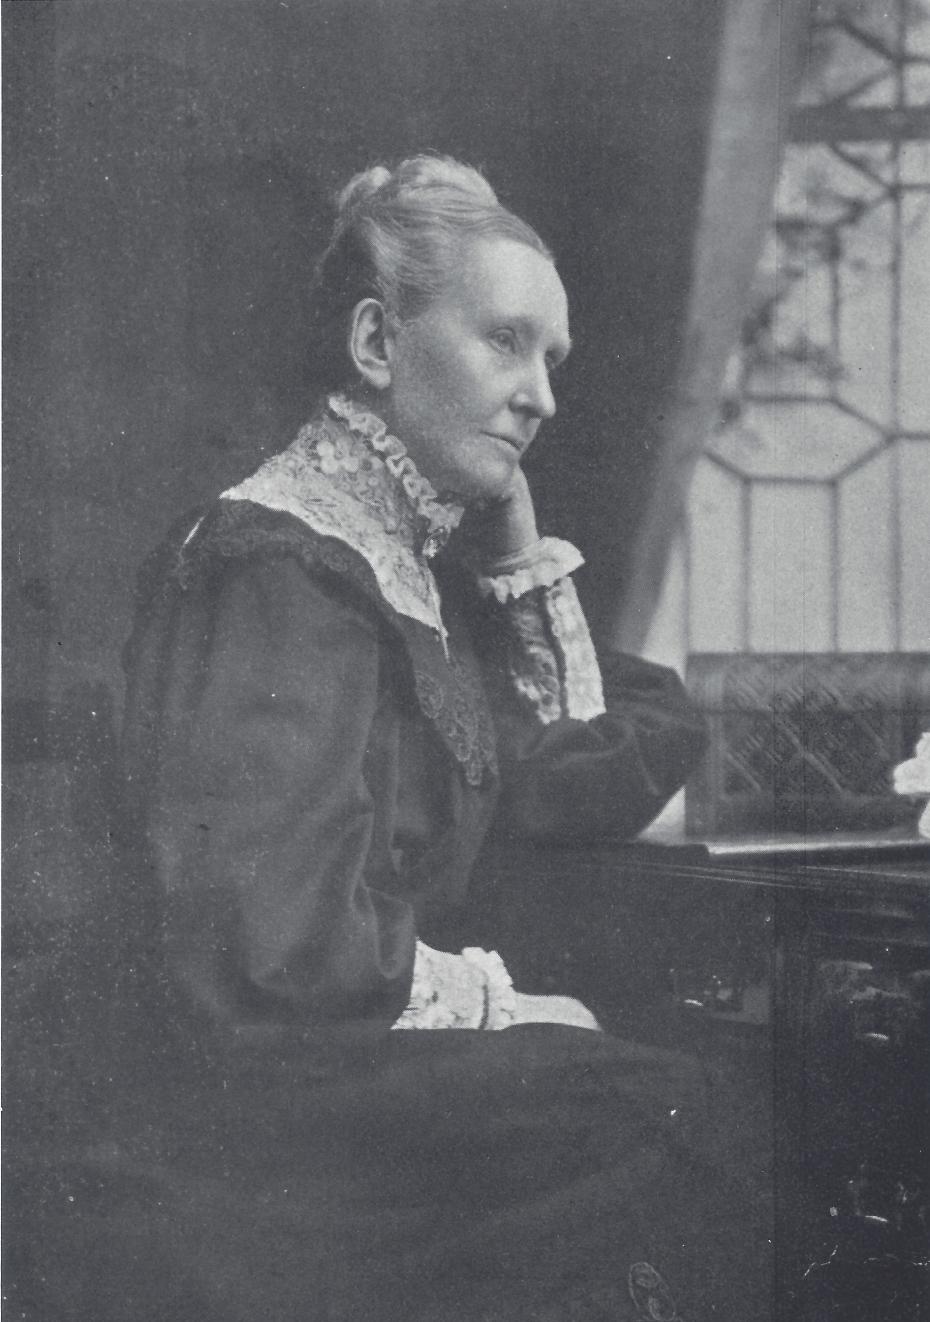 [Elizabeth] Adelaide Manning by an unknown photographer, circa 1905 (archive reference: GCPH 4/5/1)